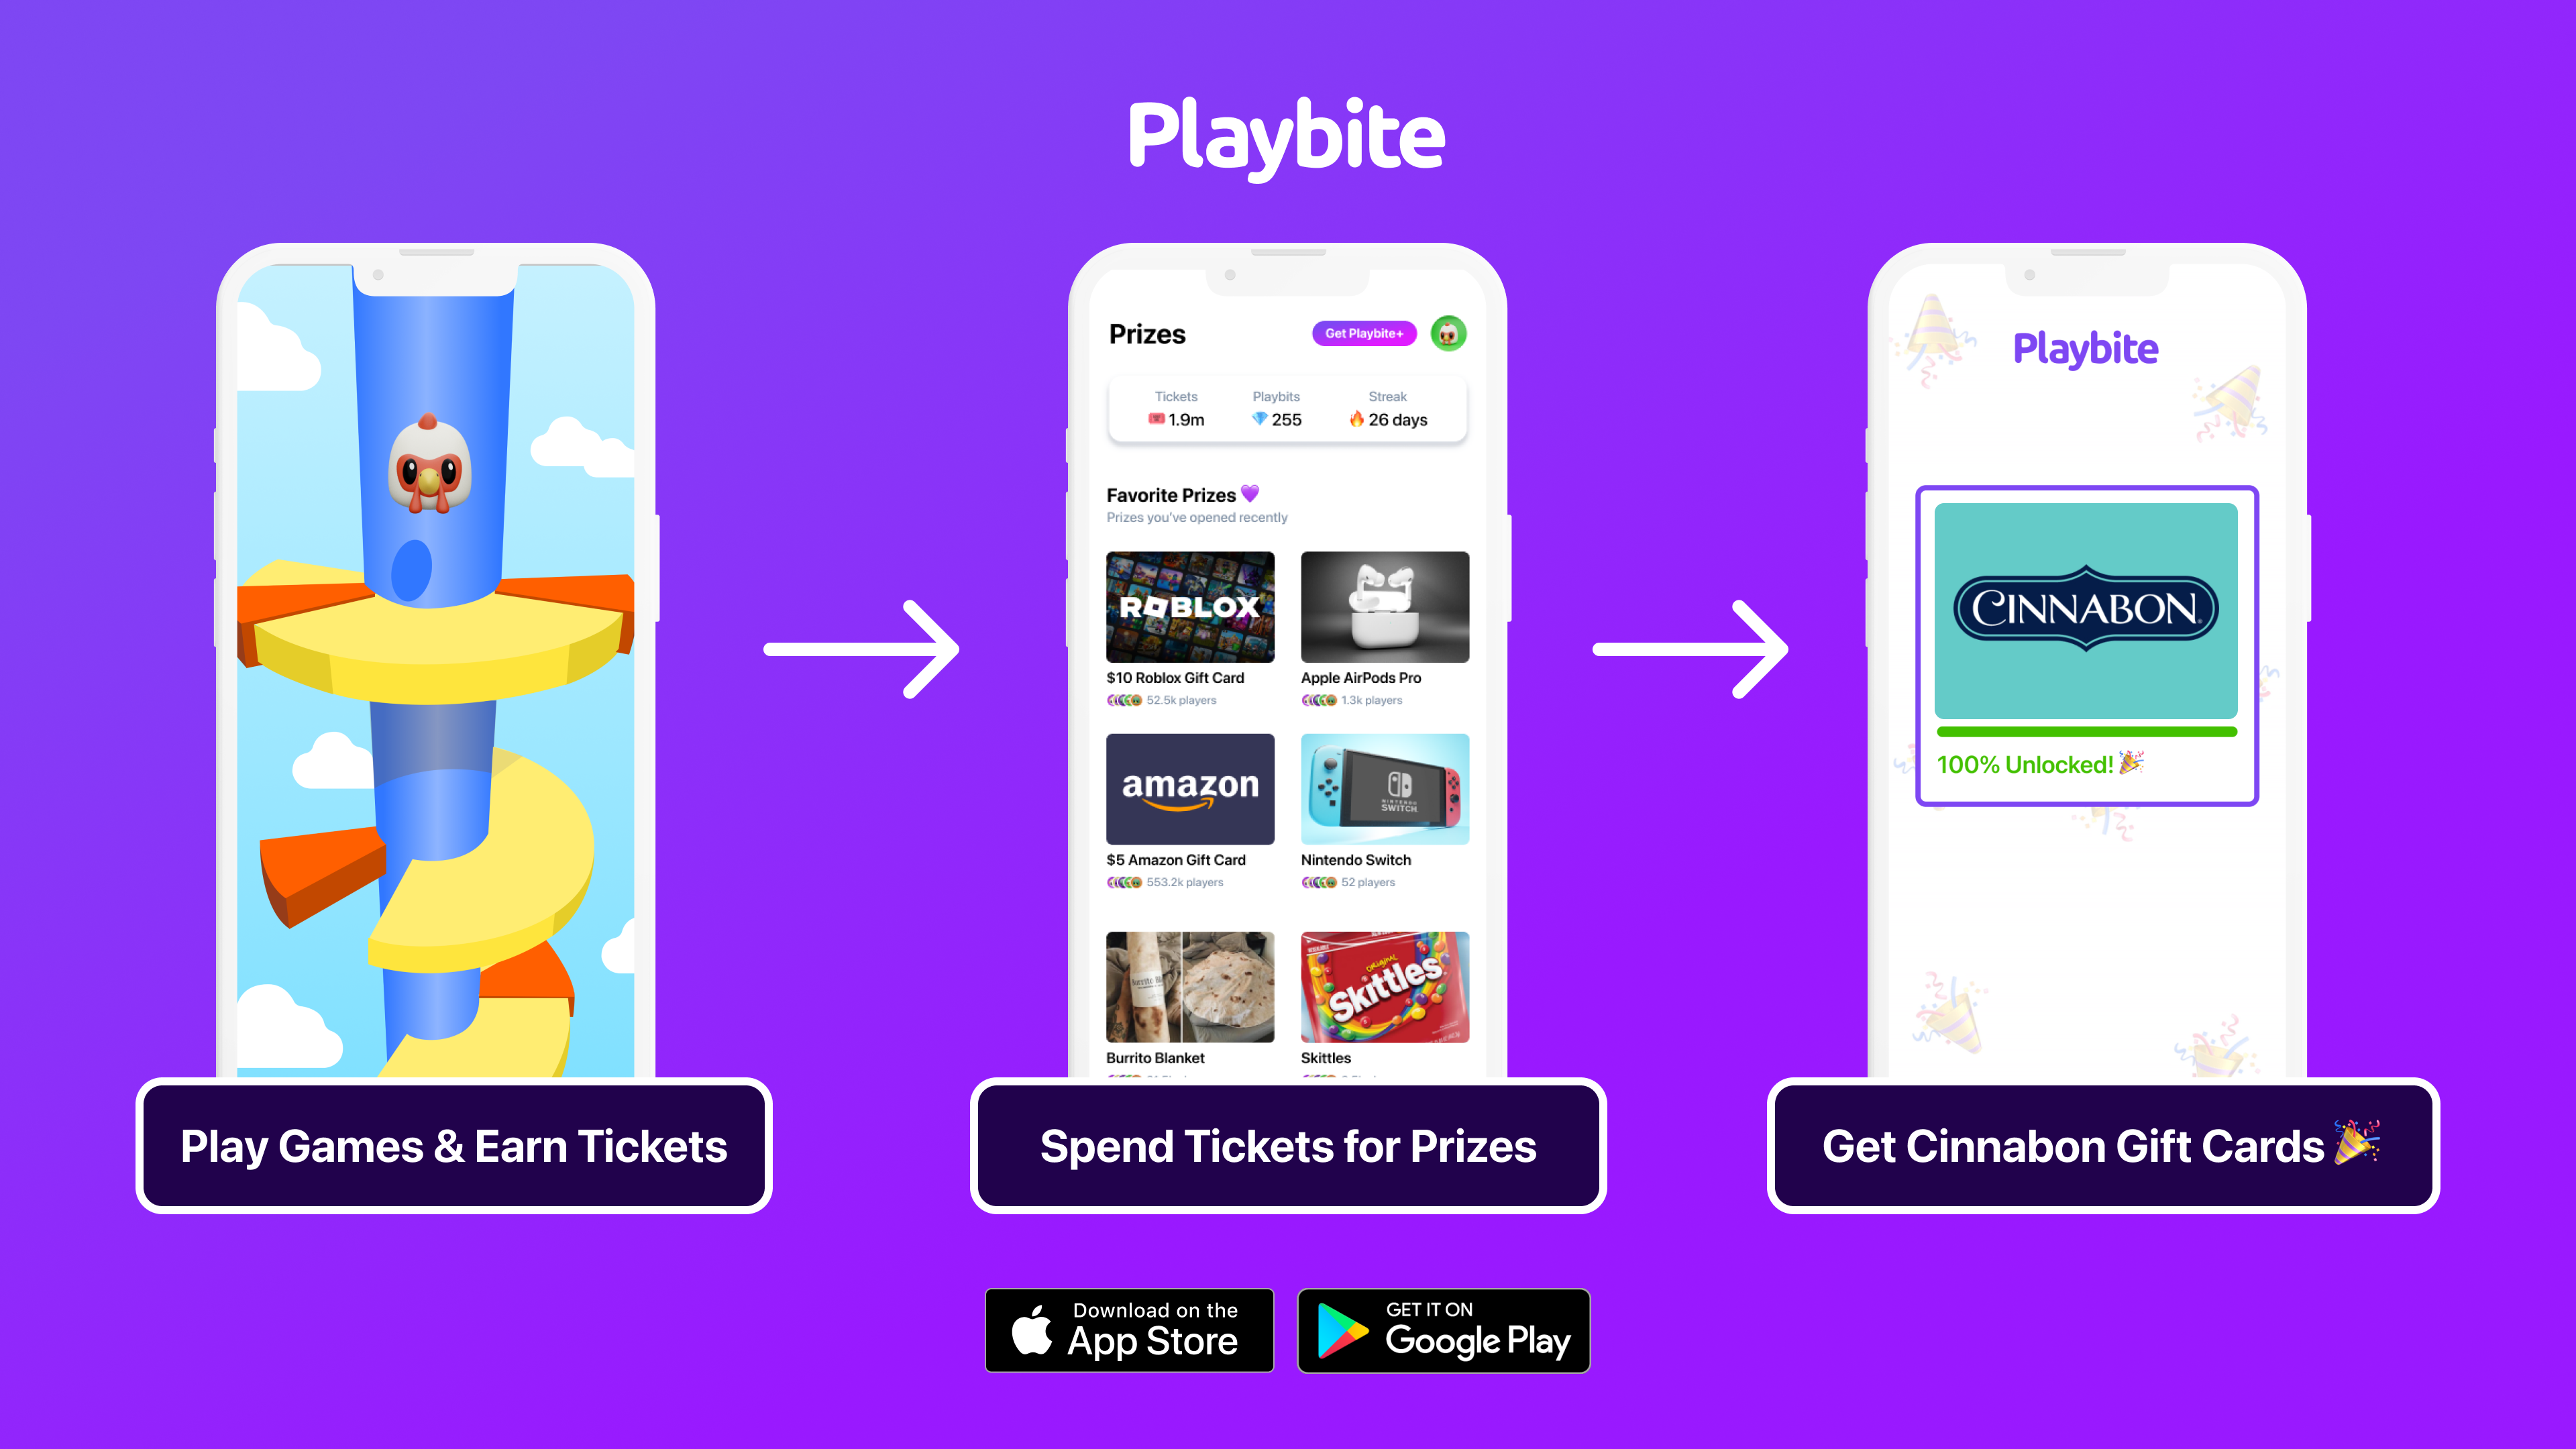 Win Cinnabon gift cards by playing games on Playbite